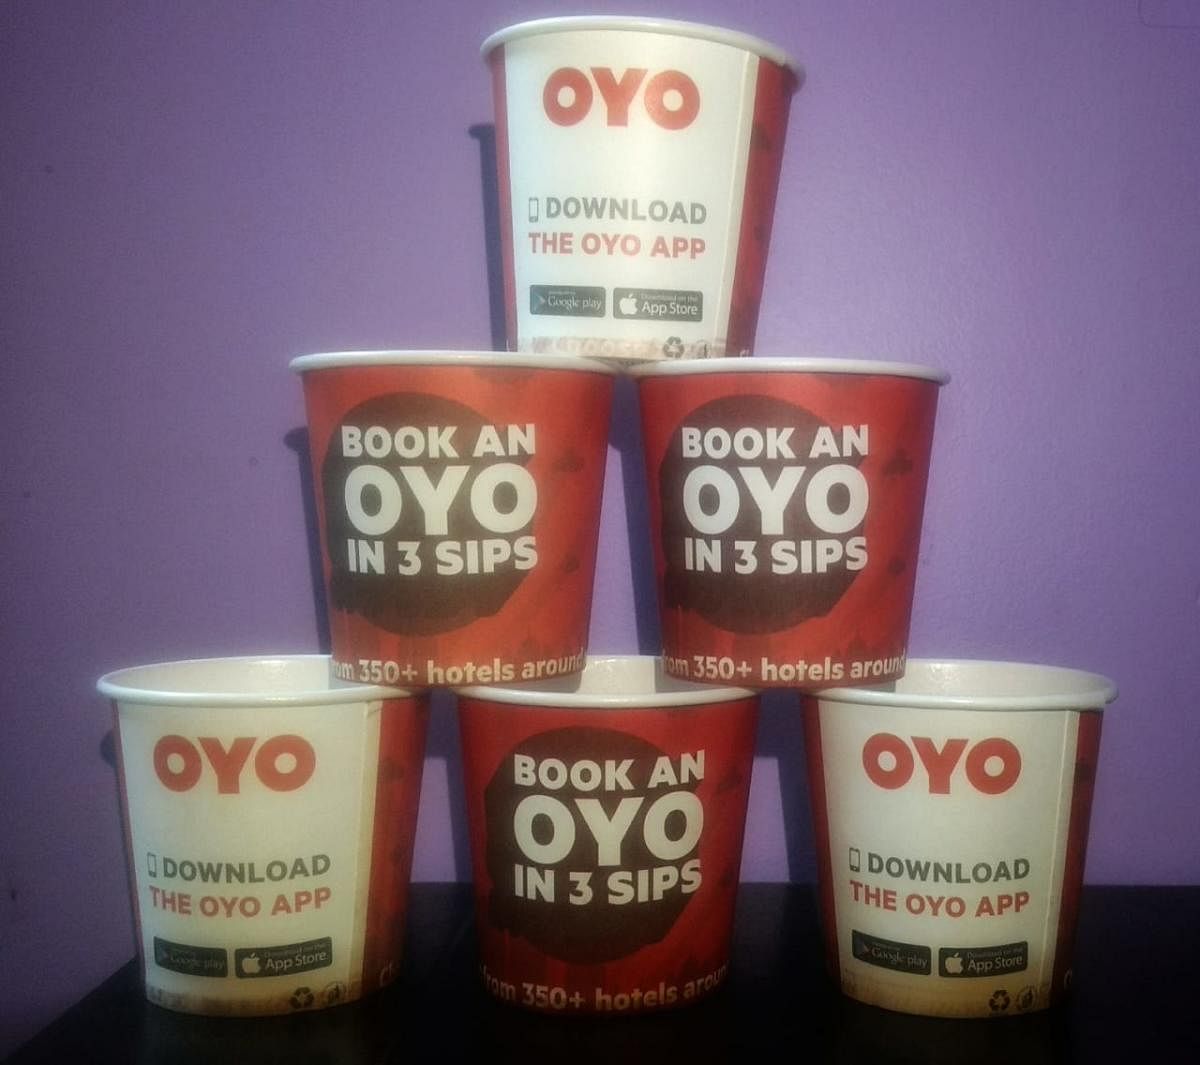 OYO's revenue for the fiscal year to end-March 2018 grew to 4.16 billion rupees ($58 million) from 1.2 billion rupees. (File Photo)